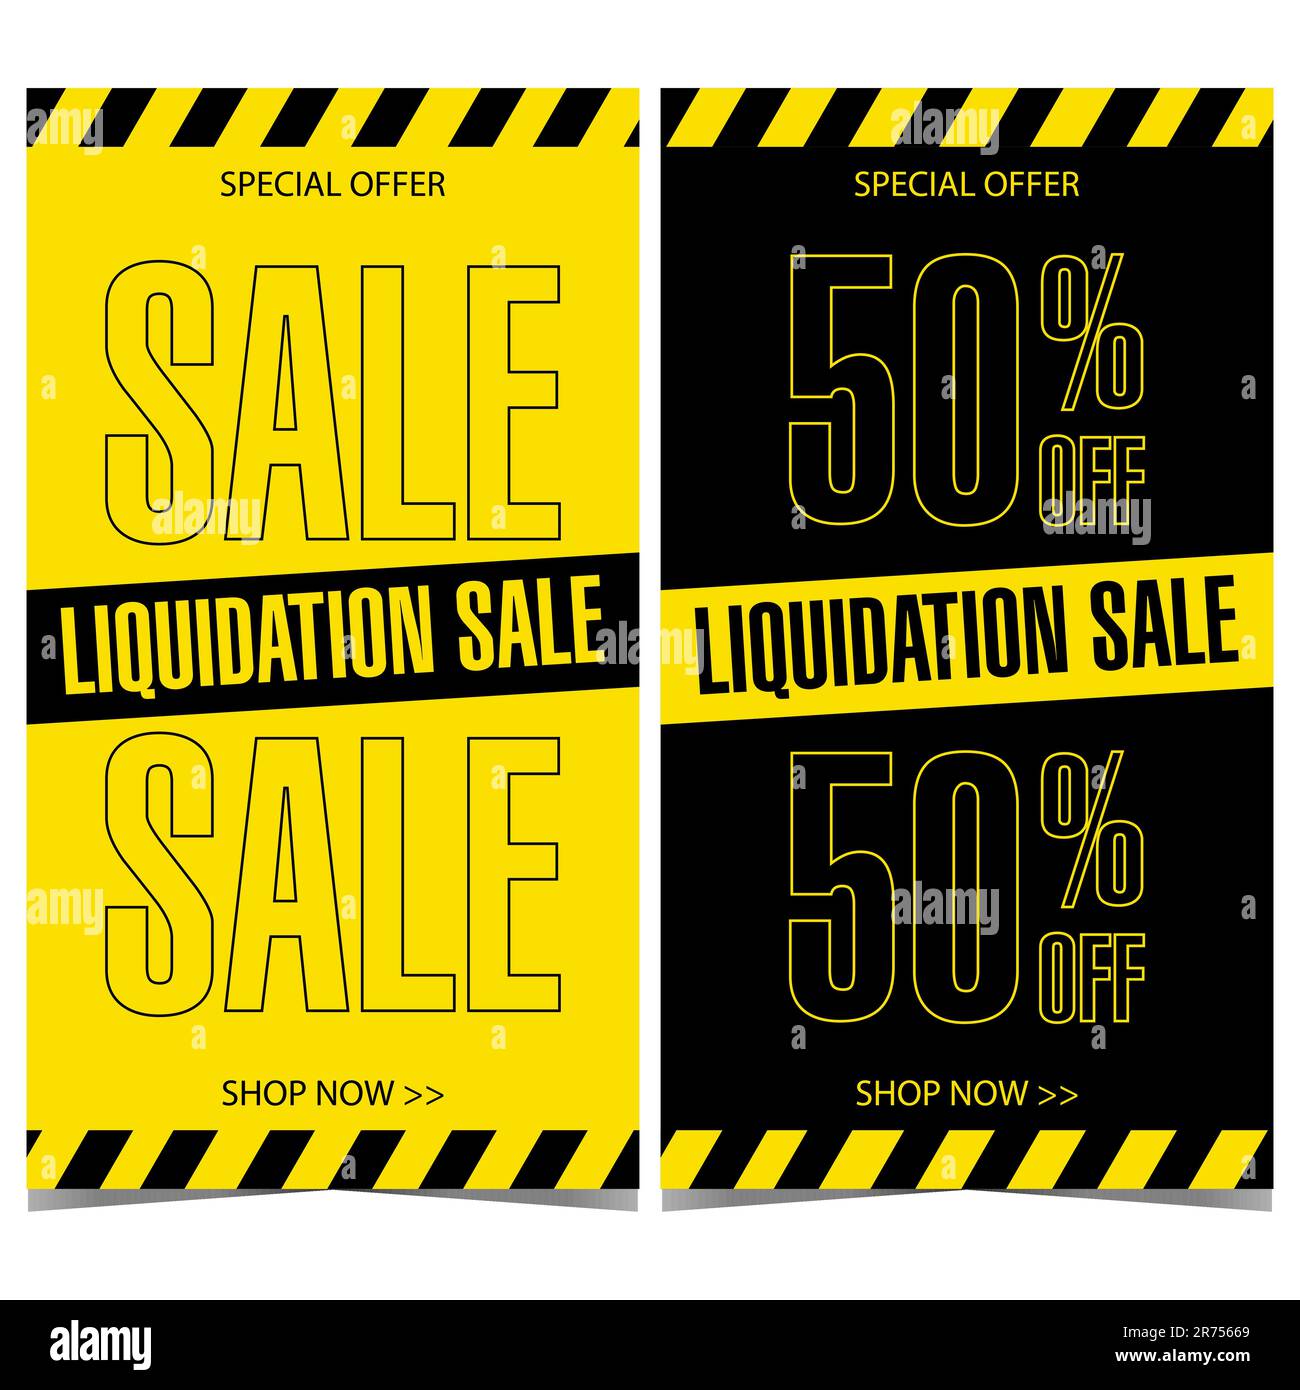 https://c8.alamy.com/comp/2R75669/sale-and-discount-black-yellow-banner-for-shopping-season-stock-liquidation-special-offer-price-reduction-promotion-campaign-and-advertising-2R75669.jpg